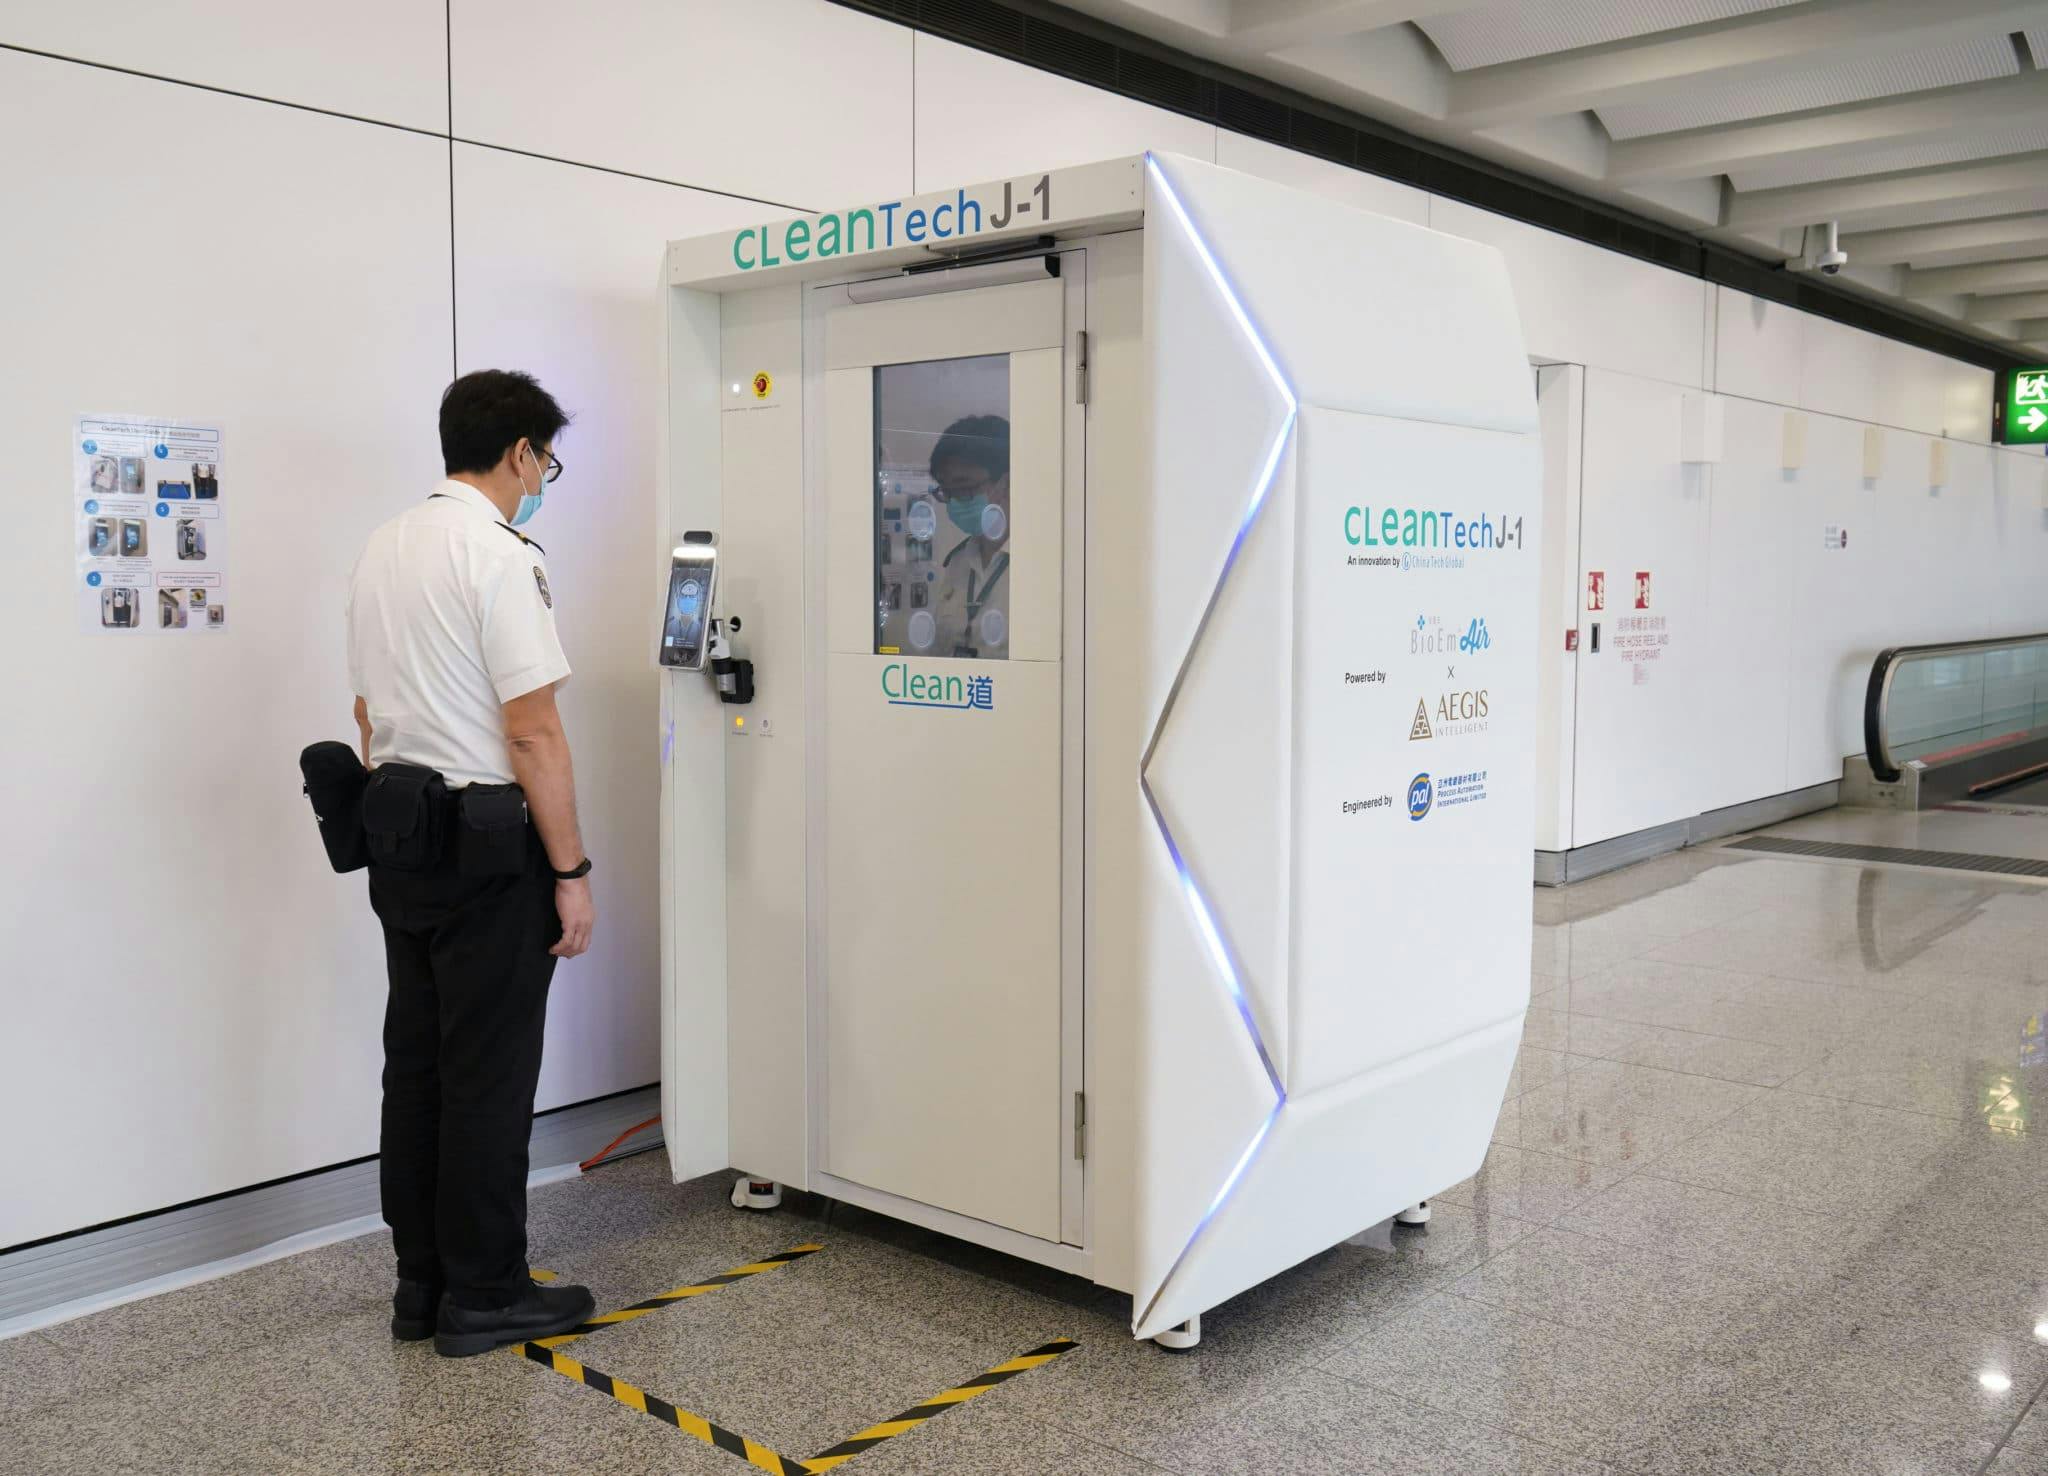 CleanTech robot for disinfecting passengers